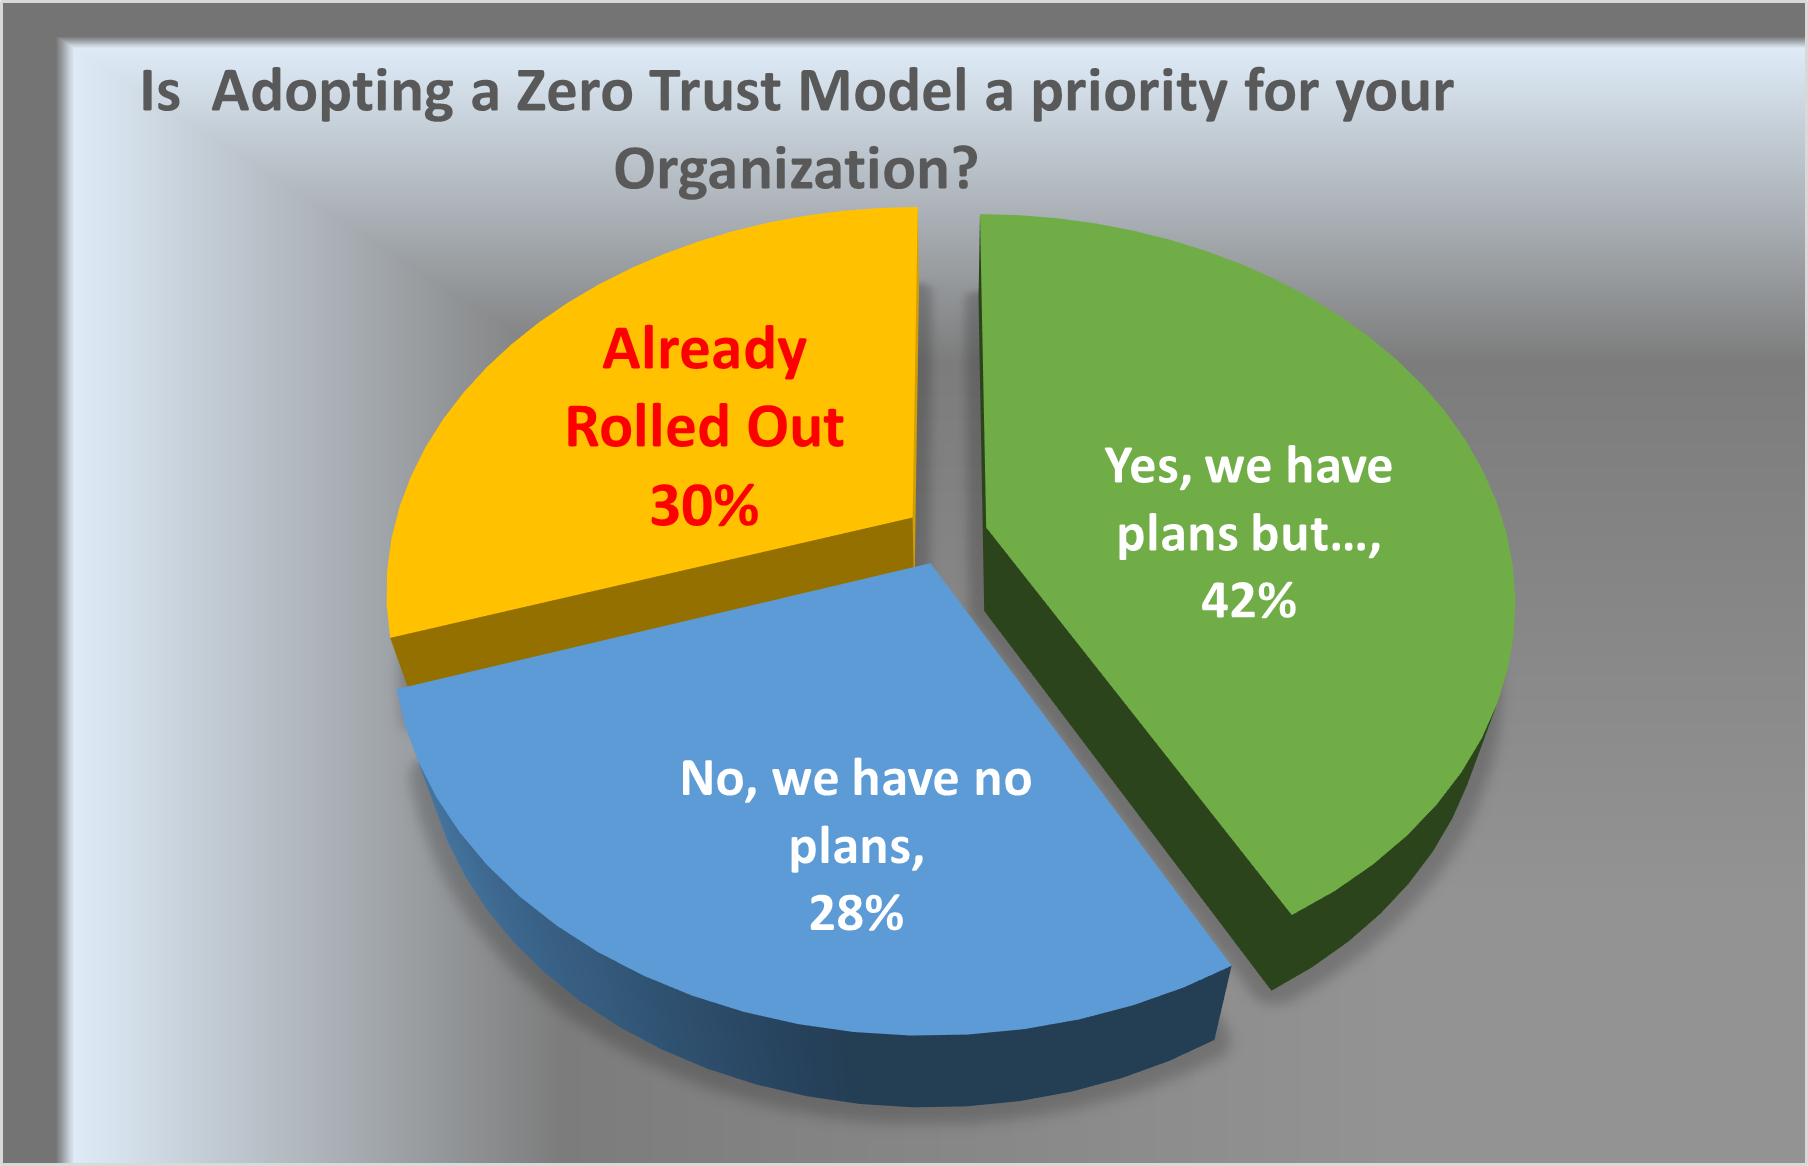 Is adopting a Zero-Trust Model a priority for your organization